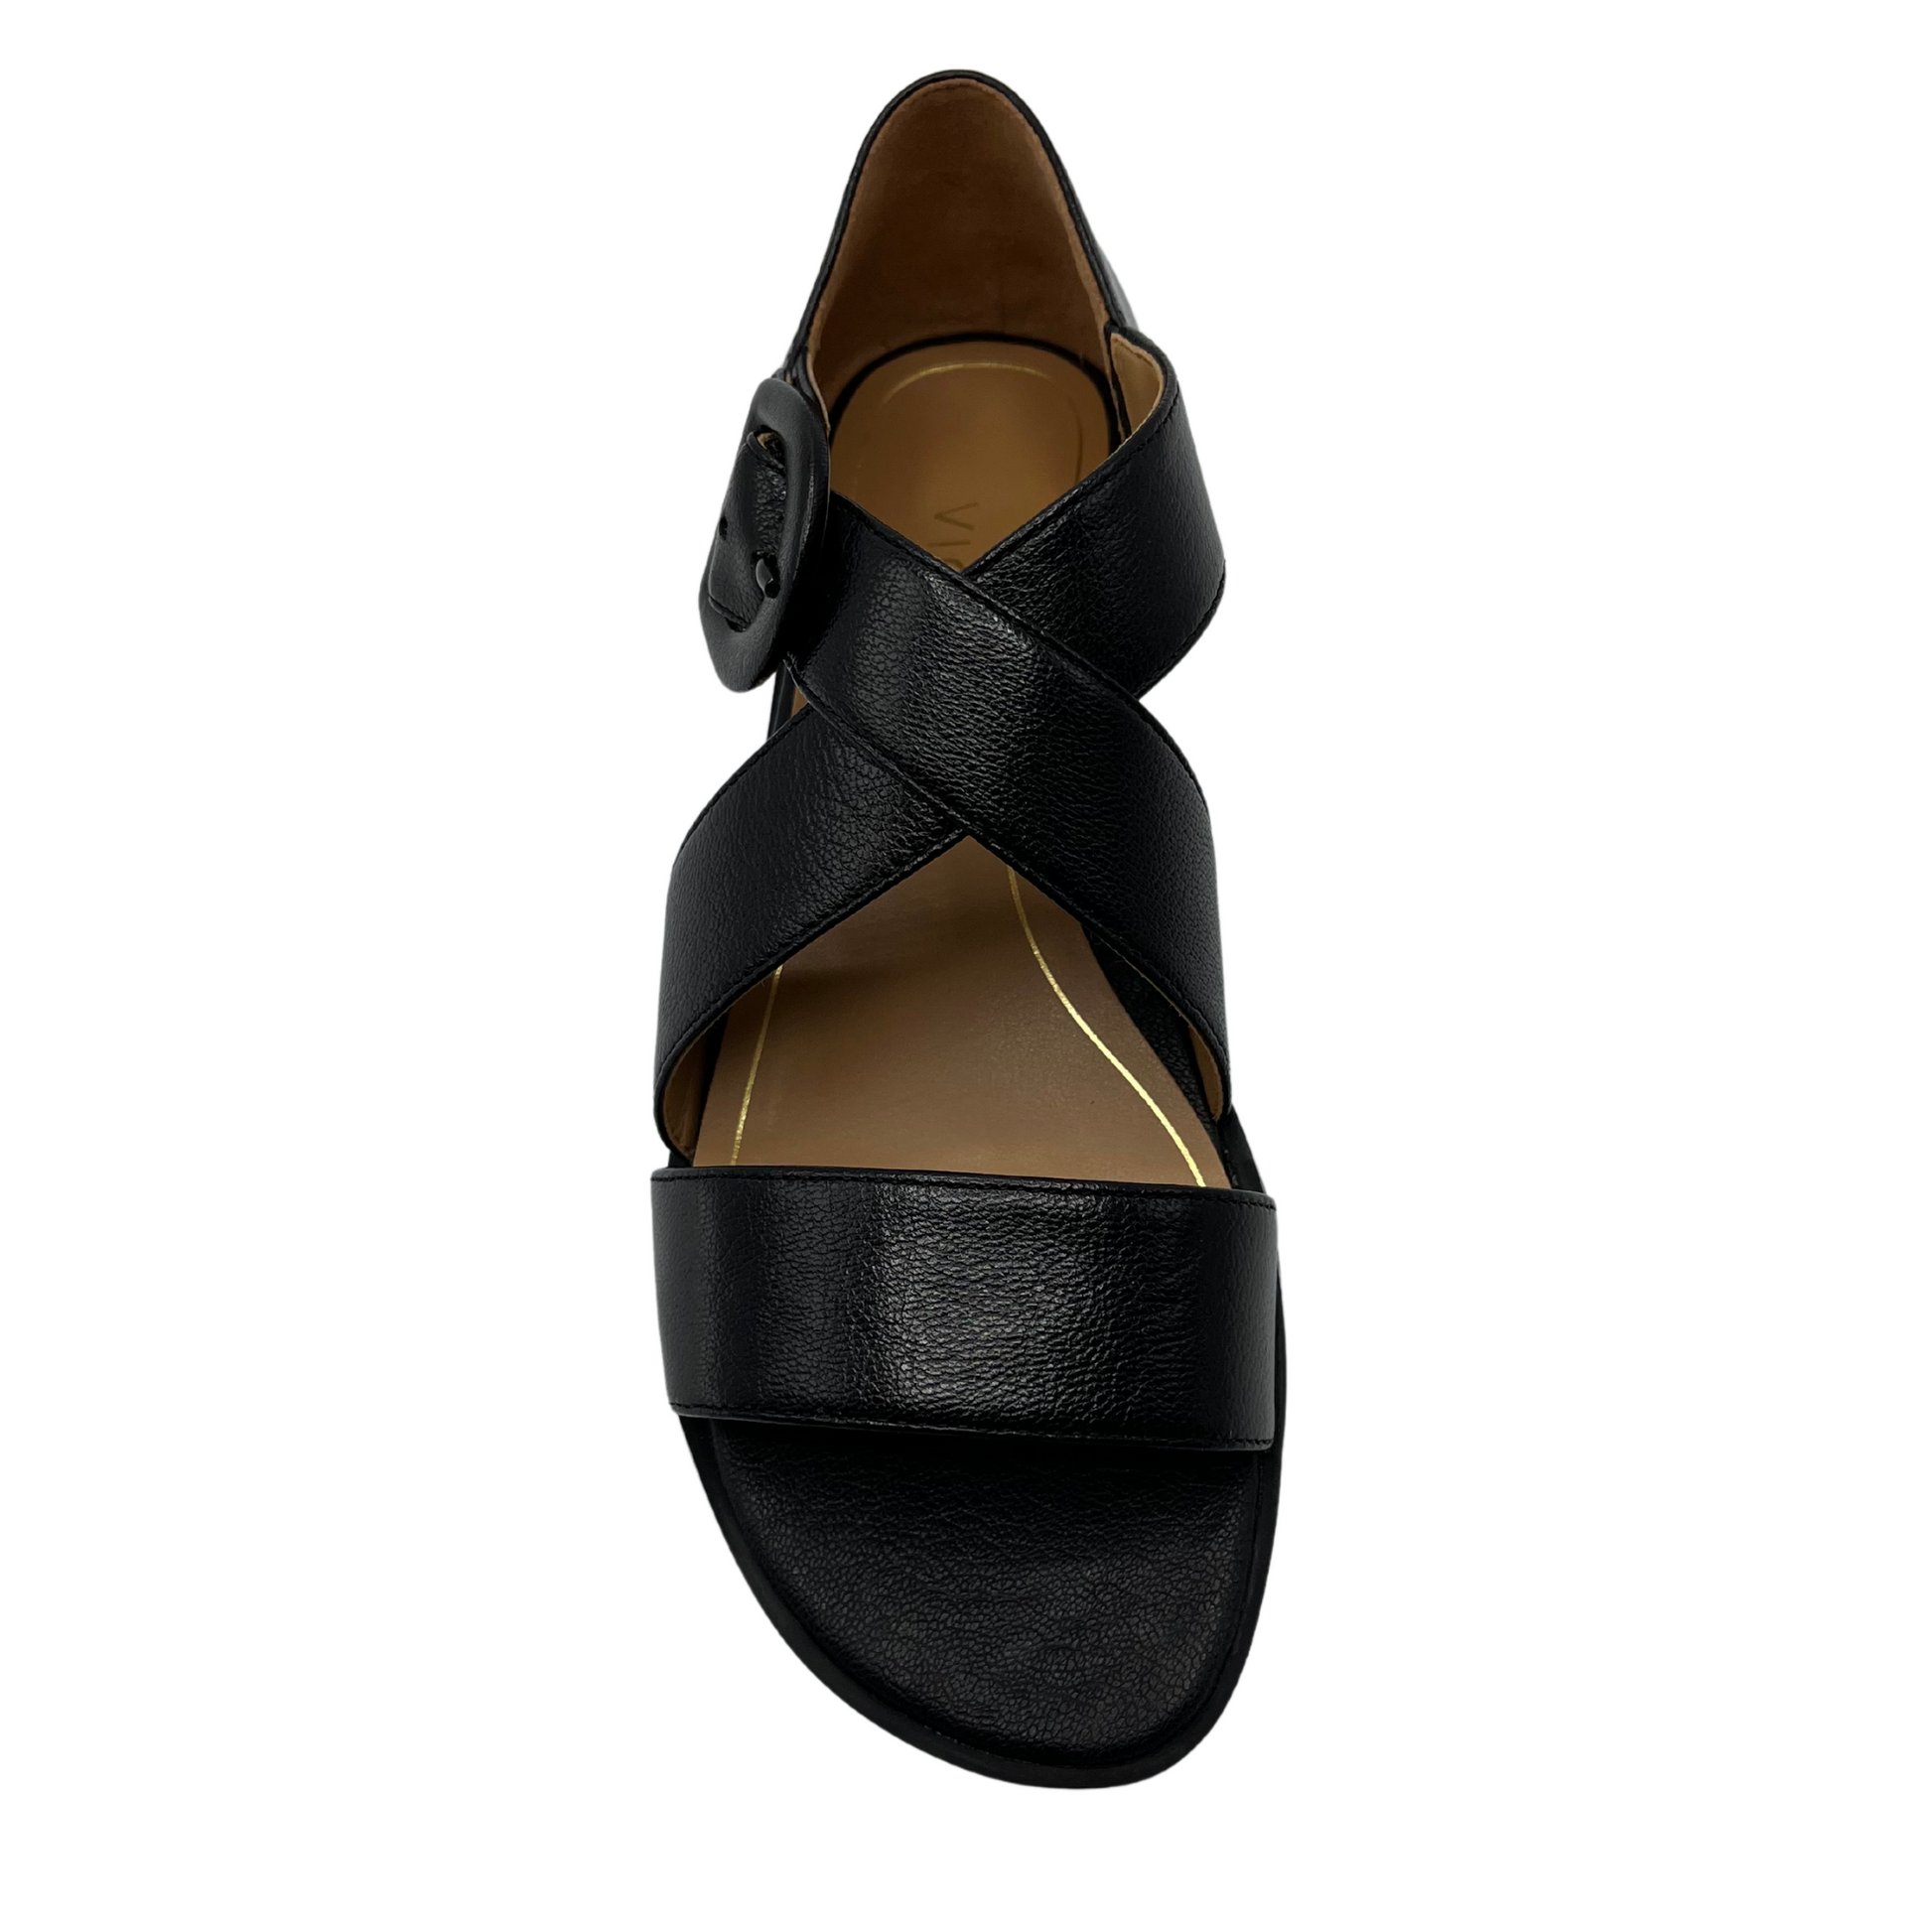 Top view of black leather sandal with criss cross straps and black buckle